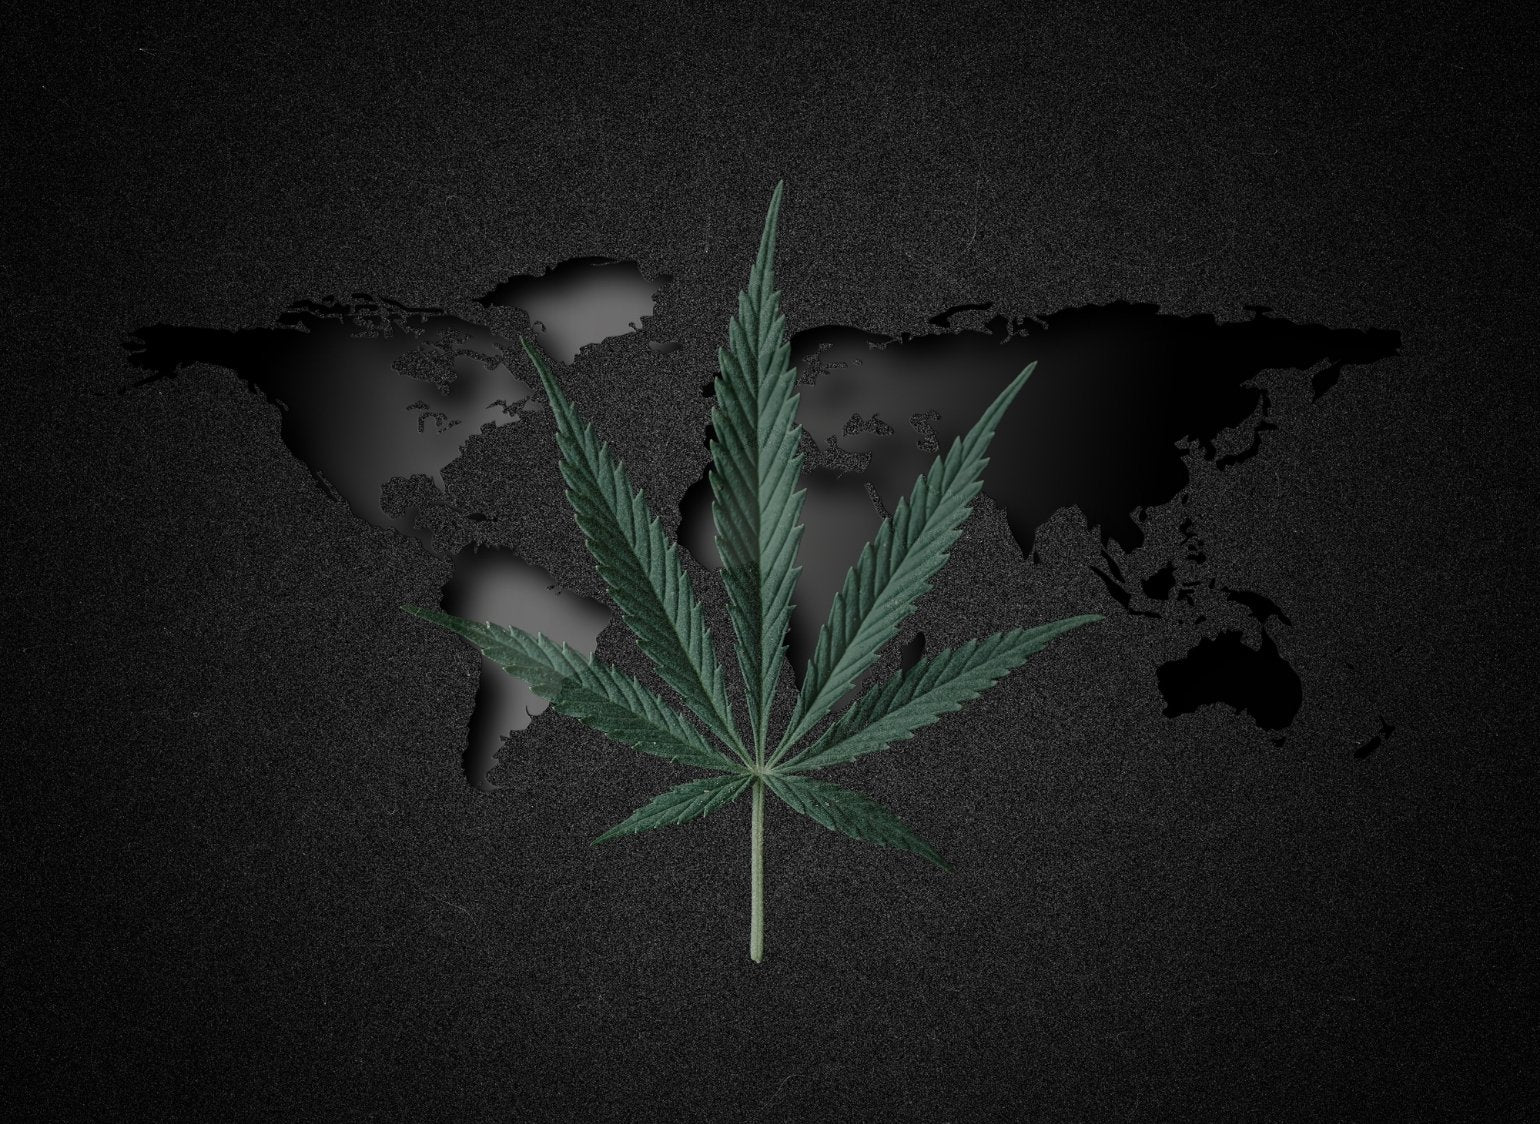 Embark on a journey through time with Ashario Cannabis as we explore the origins and early uses of cannabis. Trace the plant's fascinating history from its humble beginnings in Central Asia to its spread across continents and cultures.